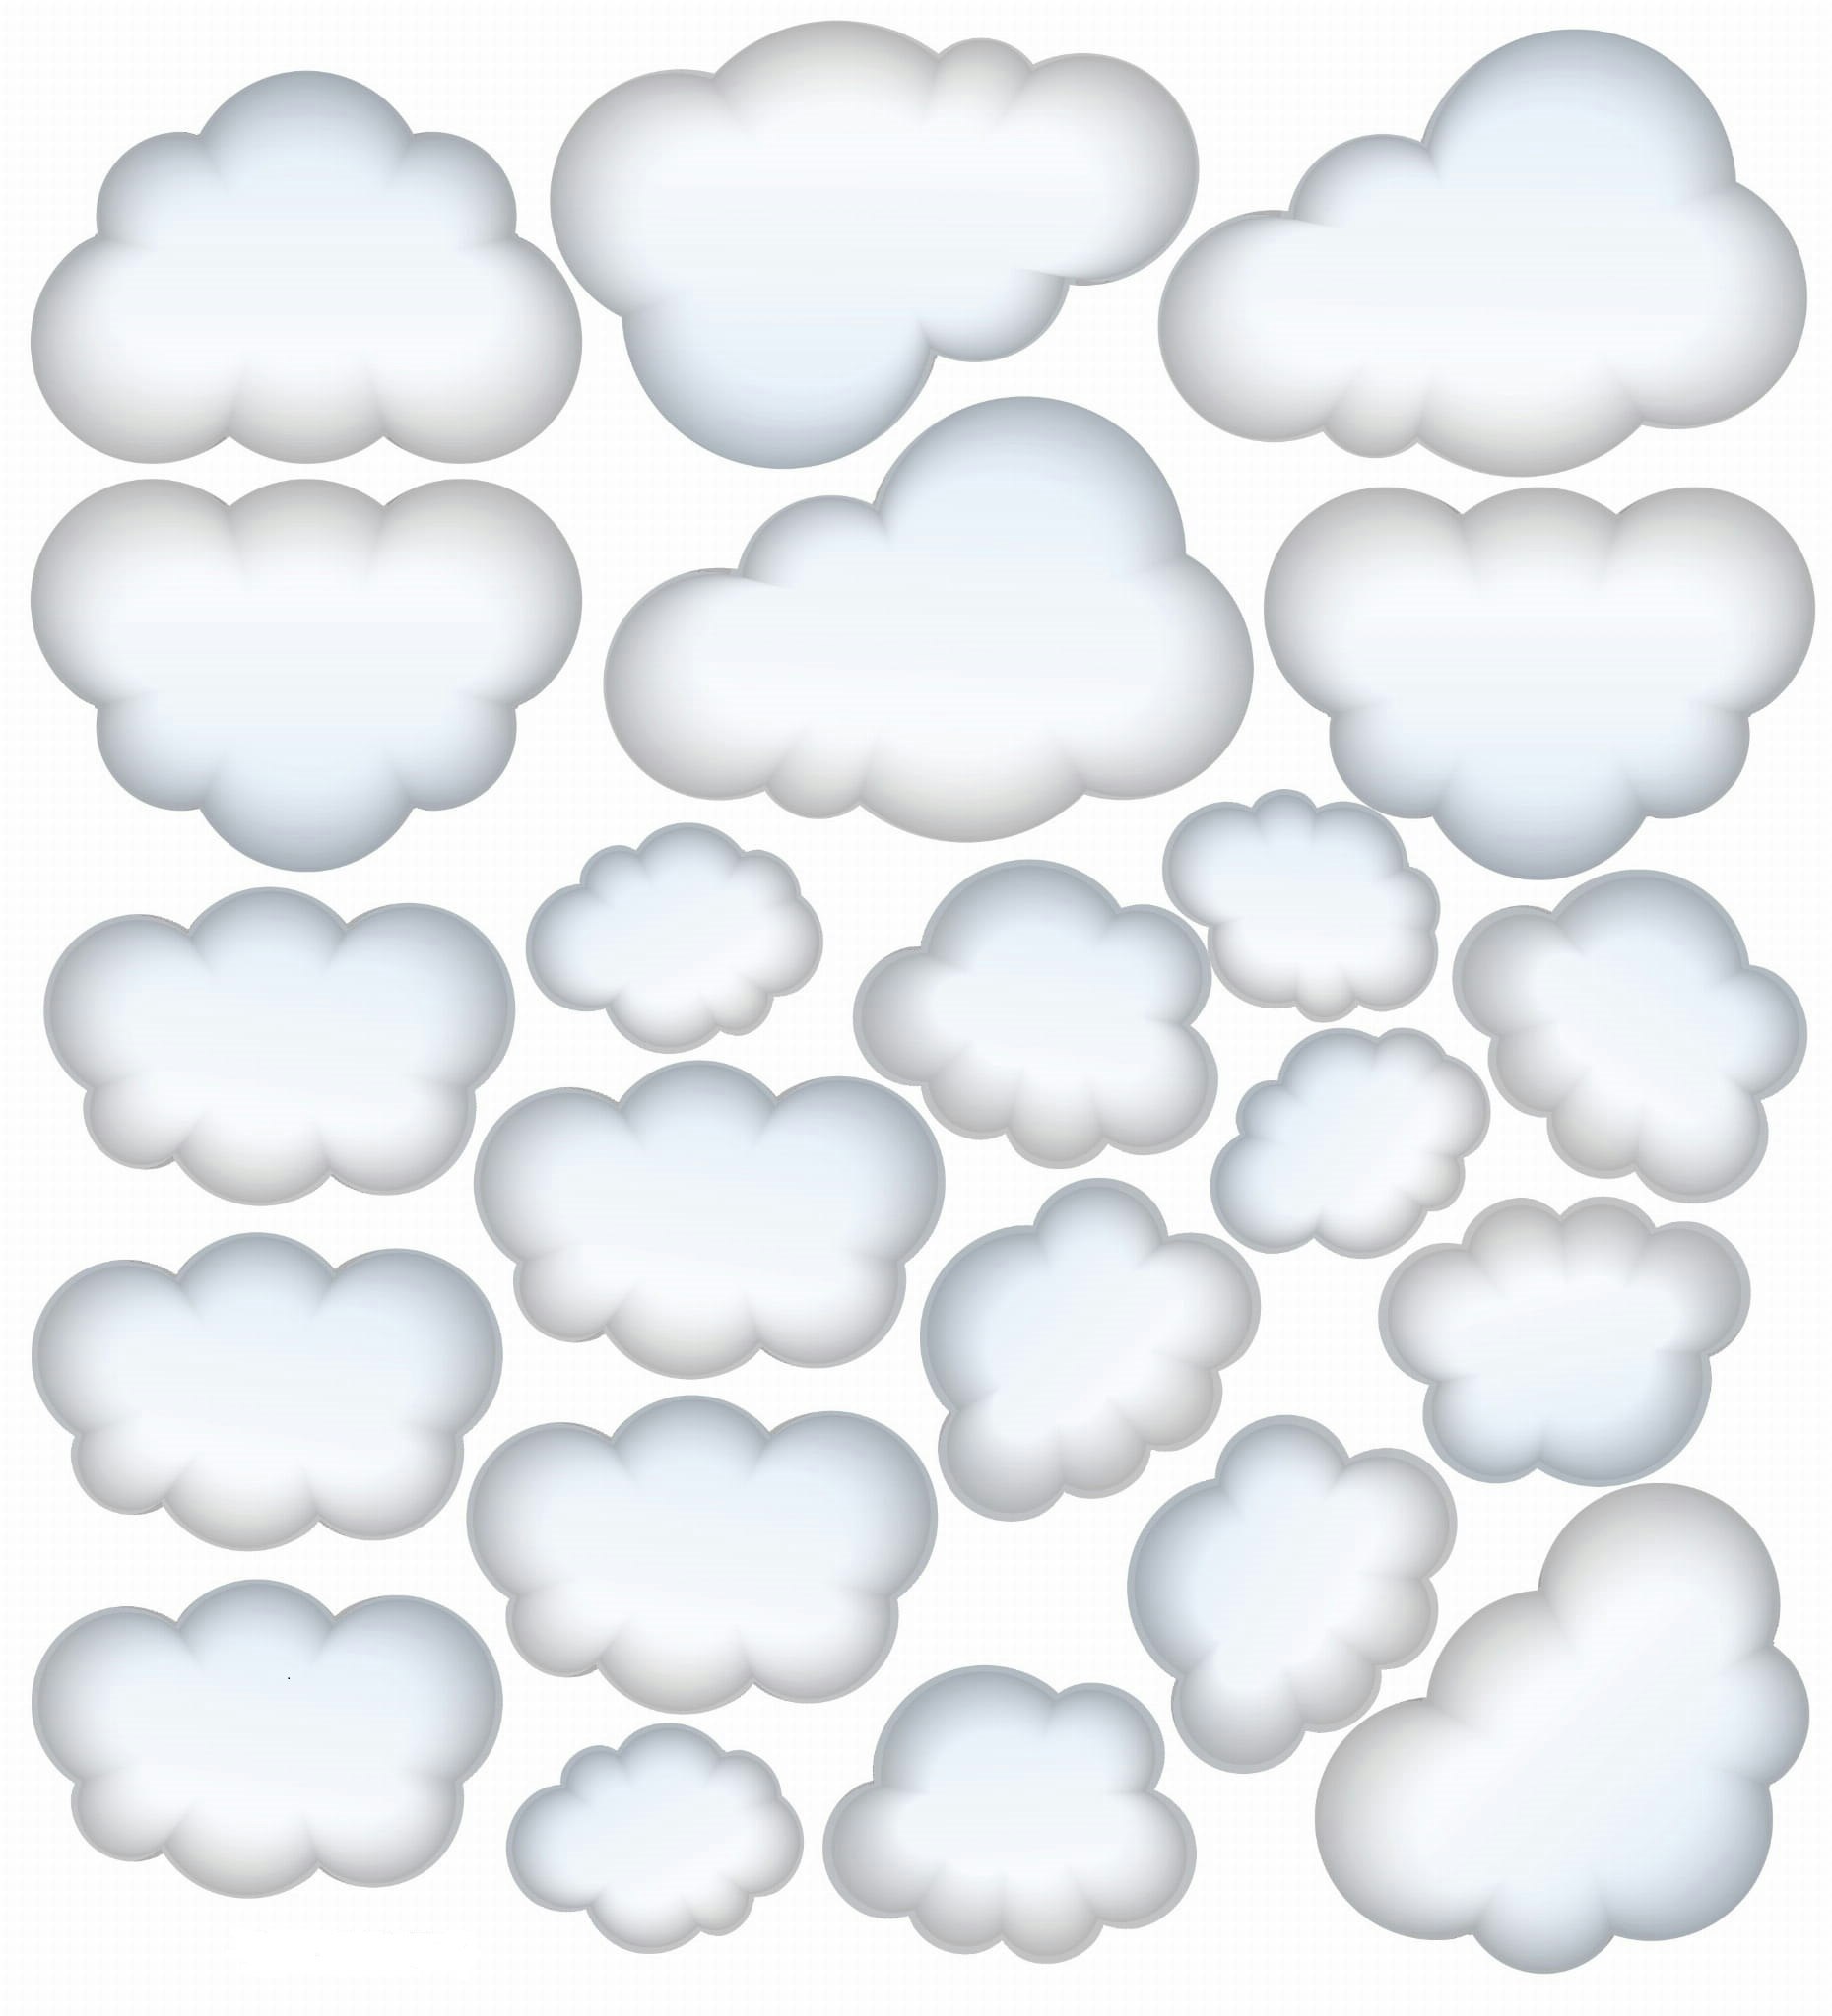 Babylove, white clouds wallstickers 22 pcs. 